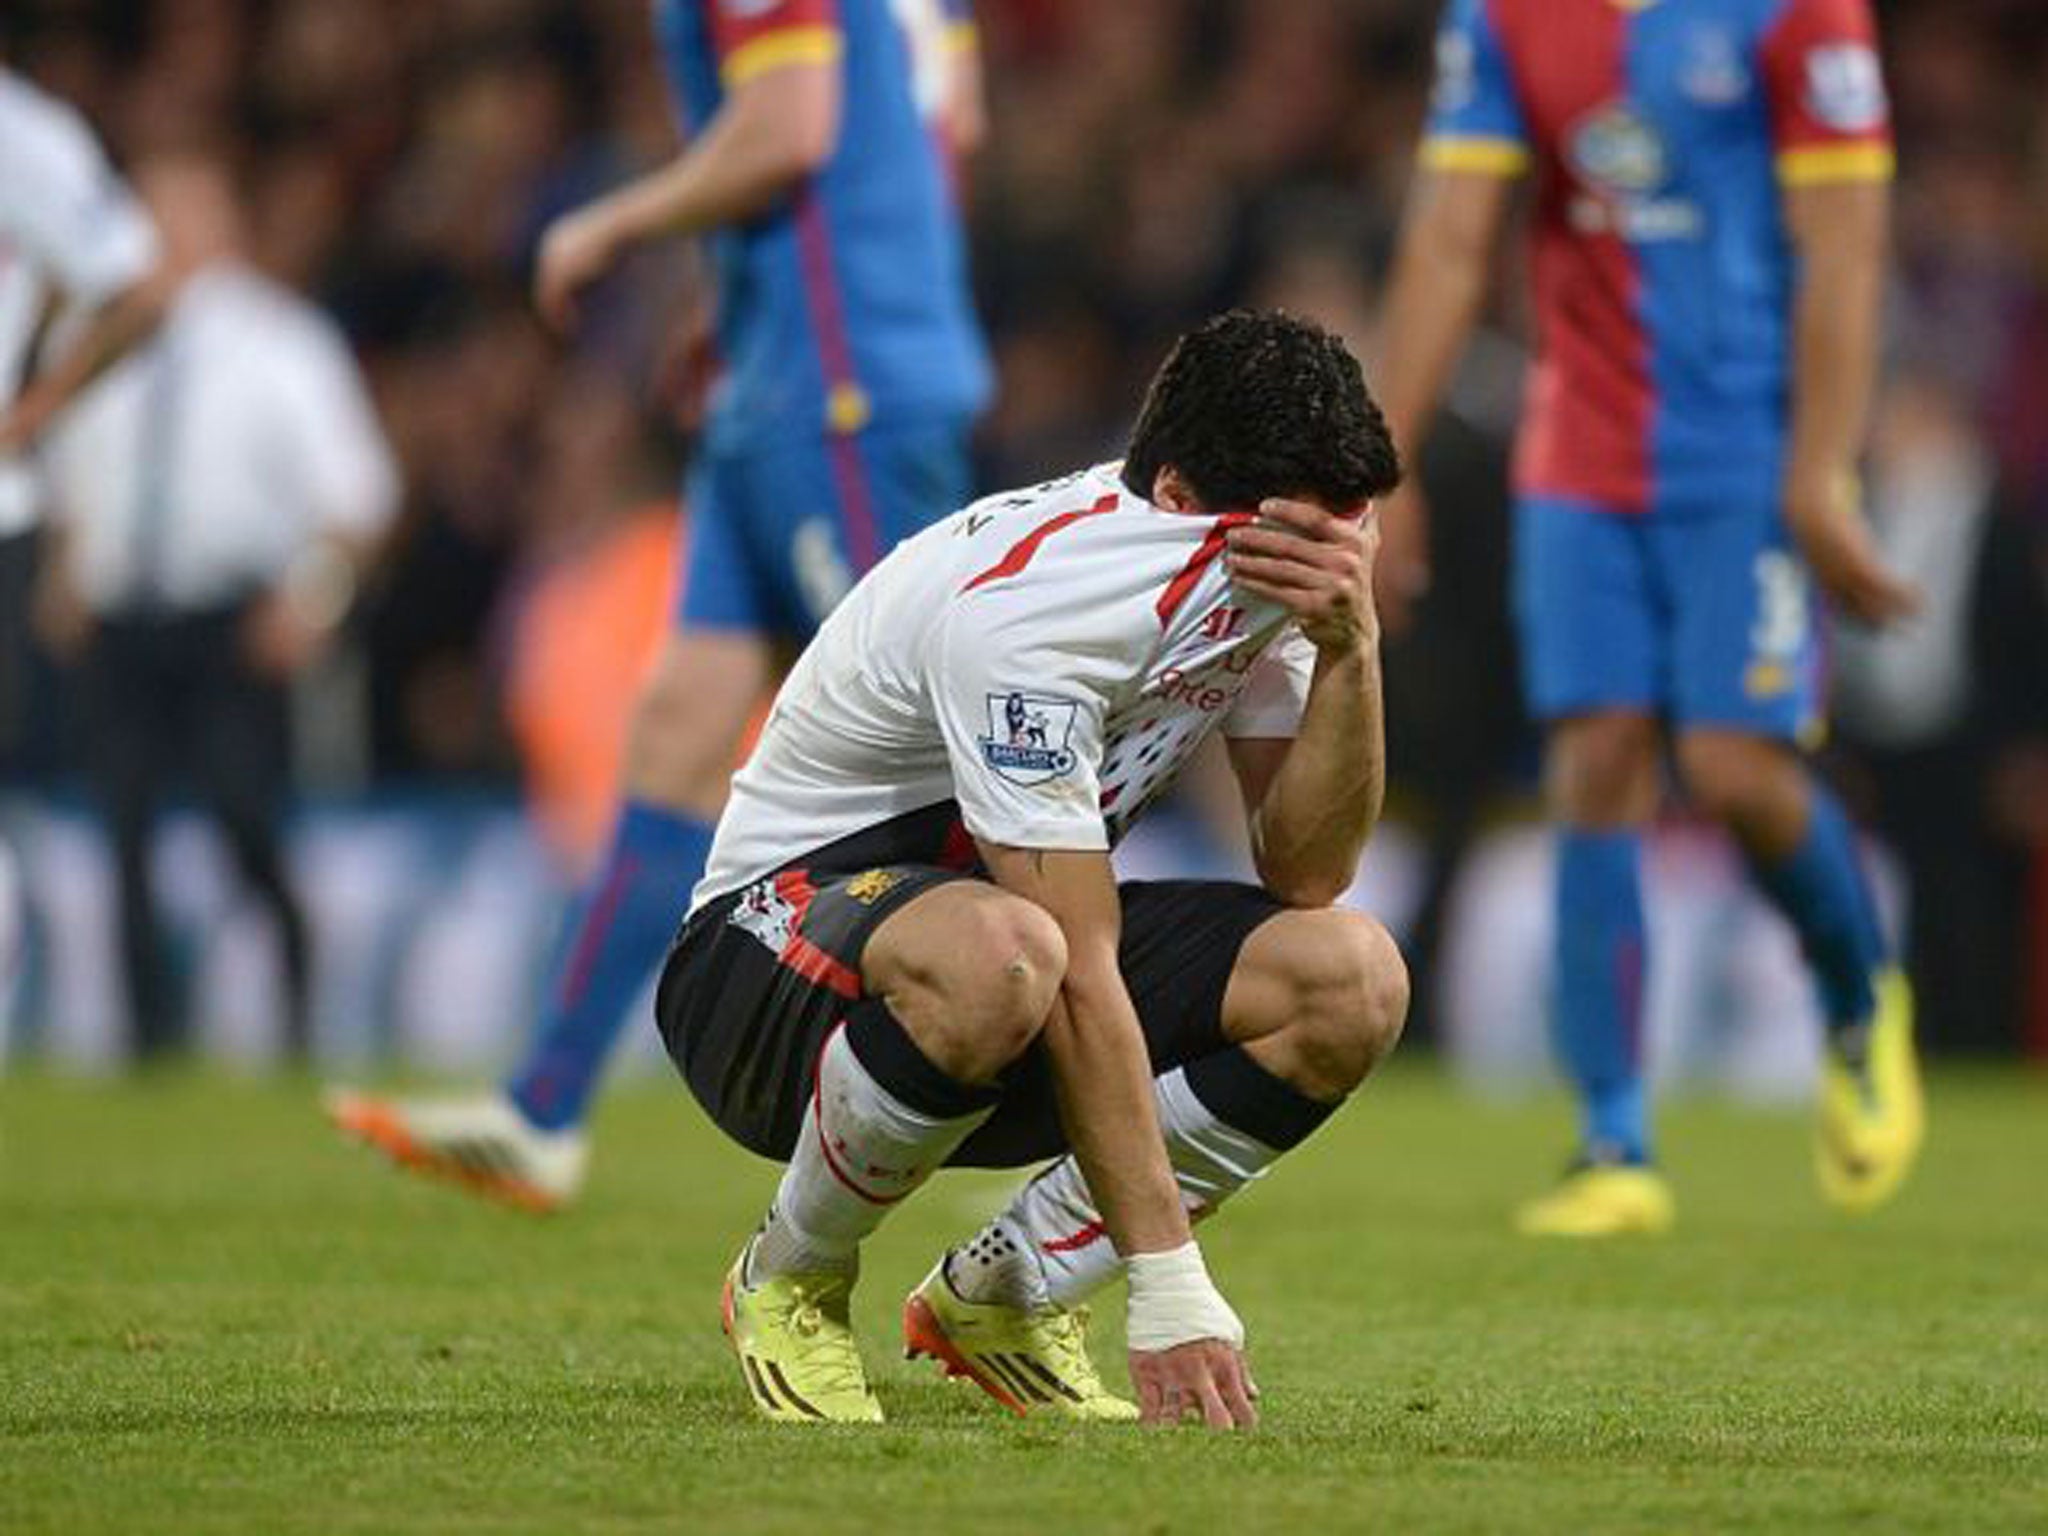 Liverpool striker Luis Suarez is distraught after drawing the match against Crystal Palace where the Uruguayan had equalled the record number of goals in a Premier League season